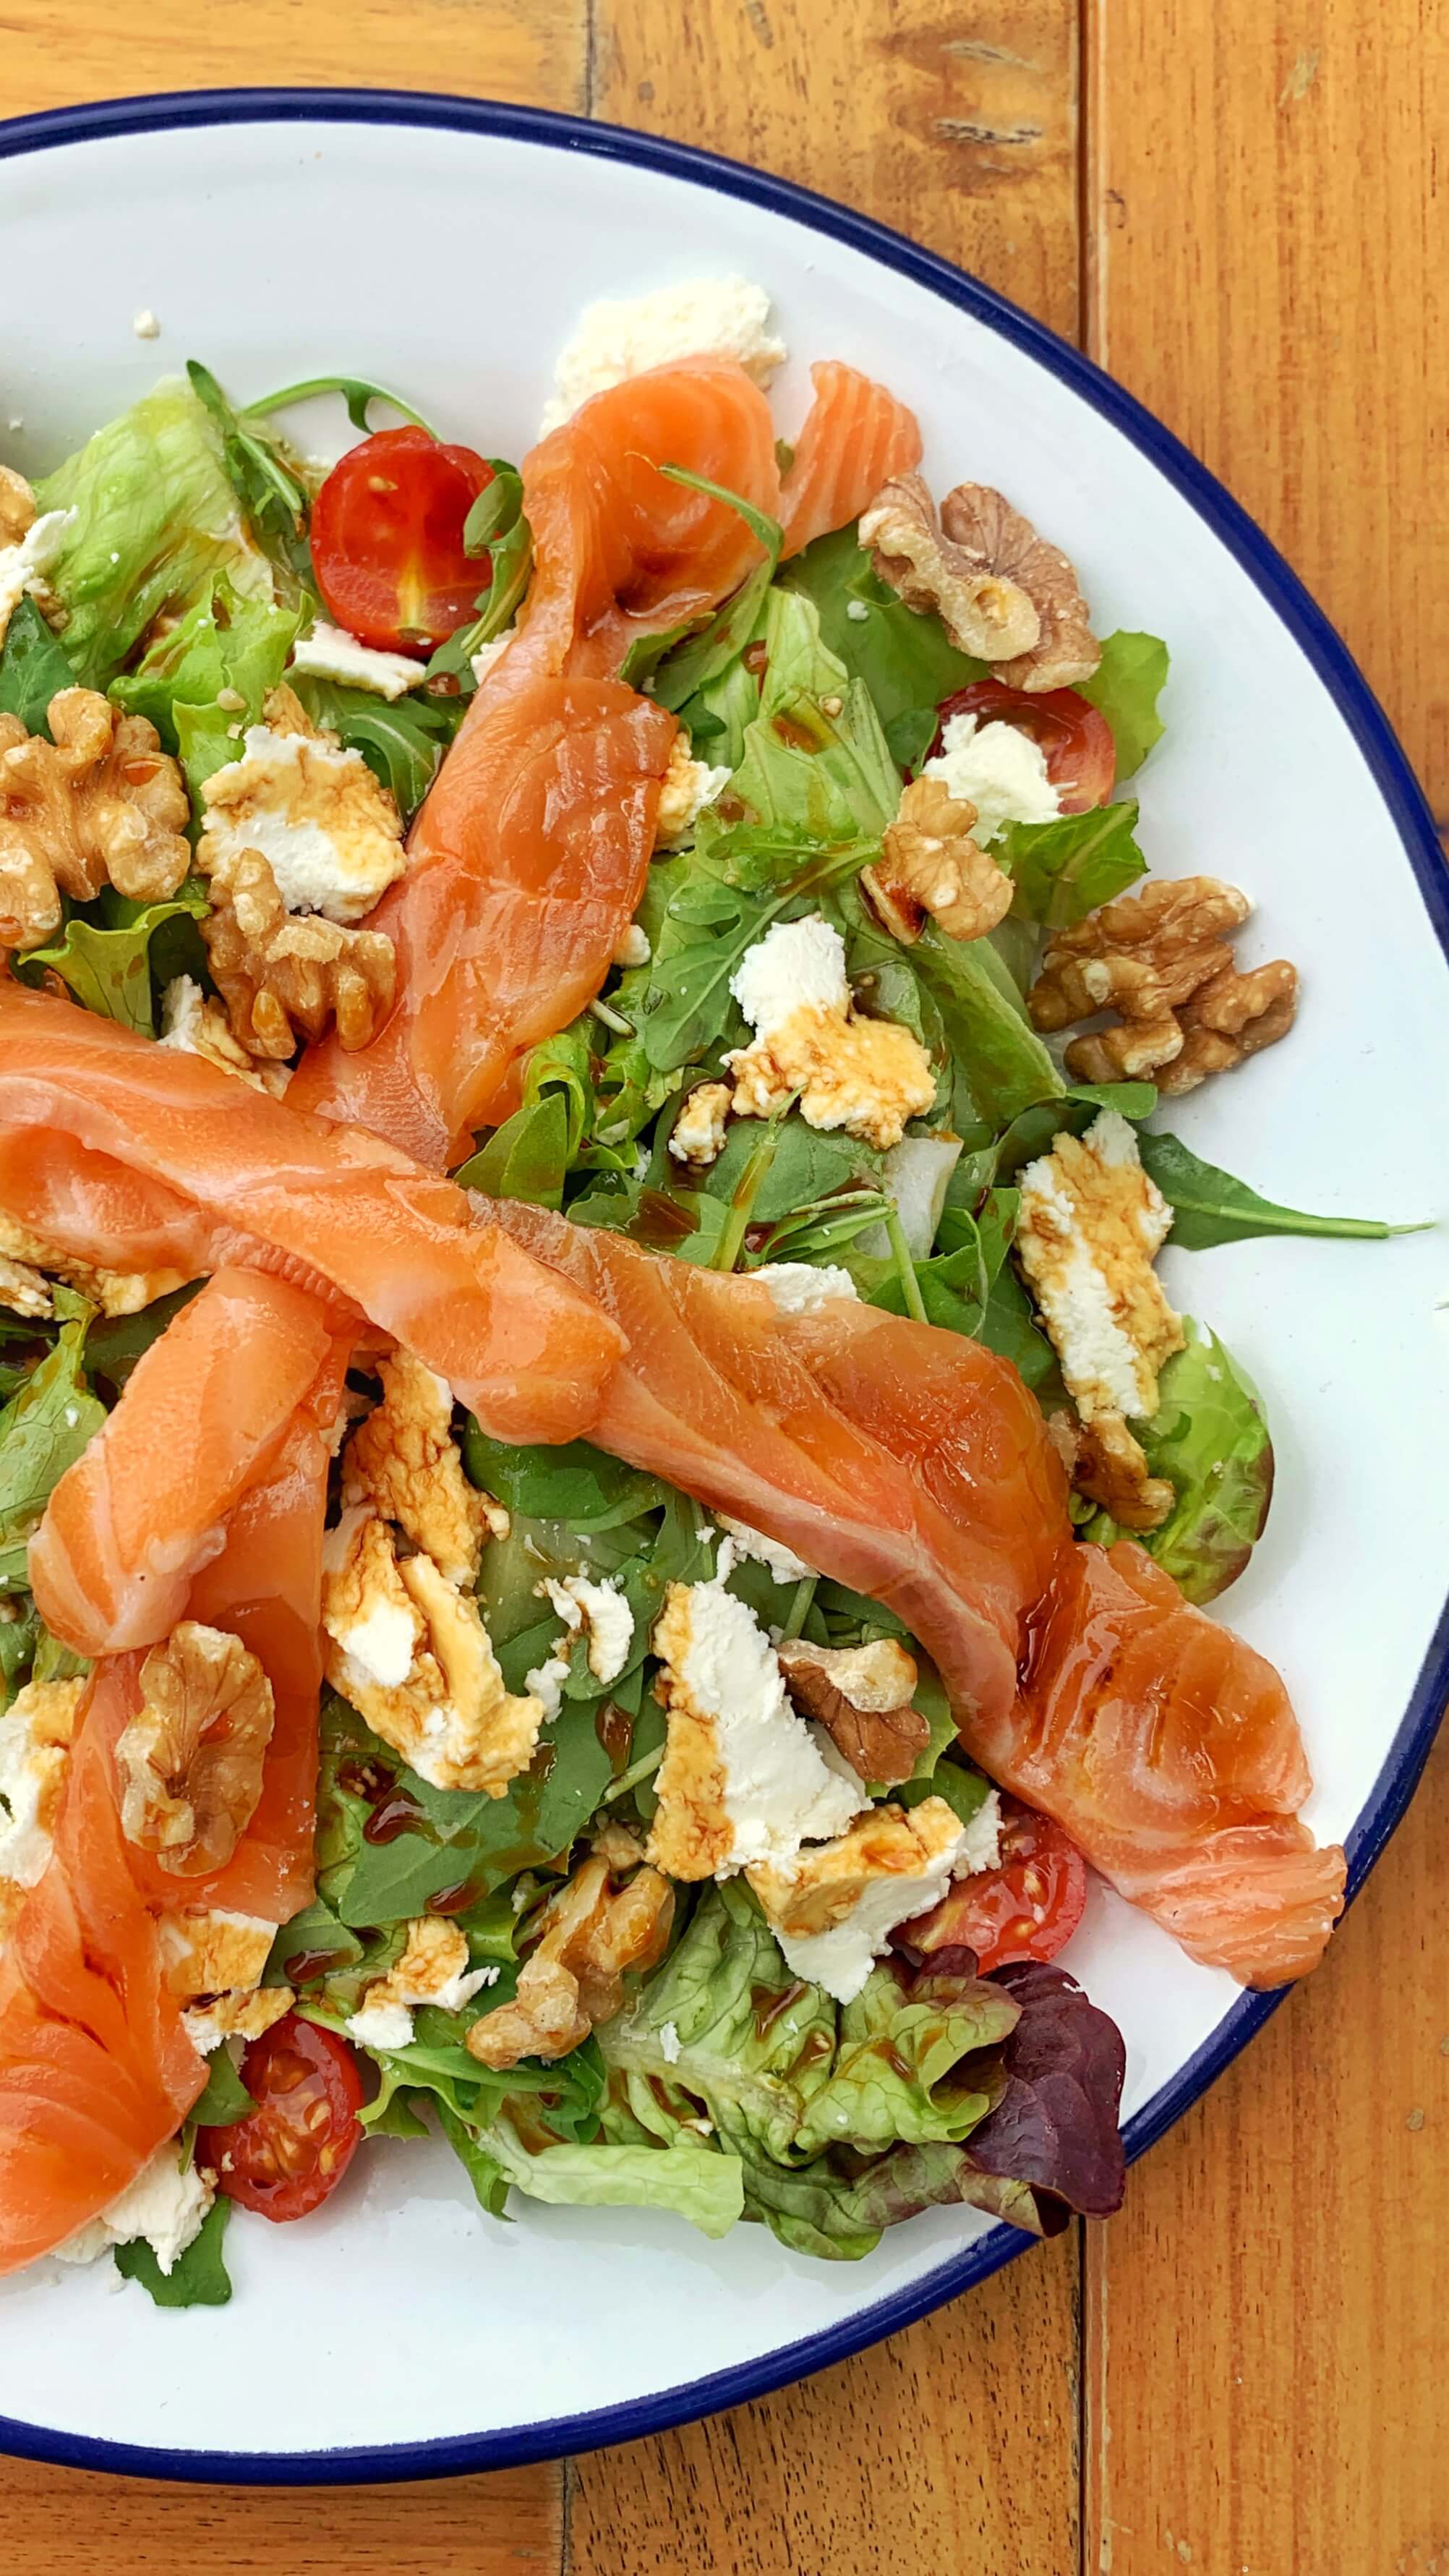 Salmon, rucola, fresh cheese and nuts